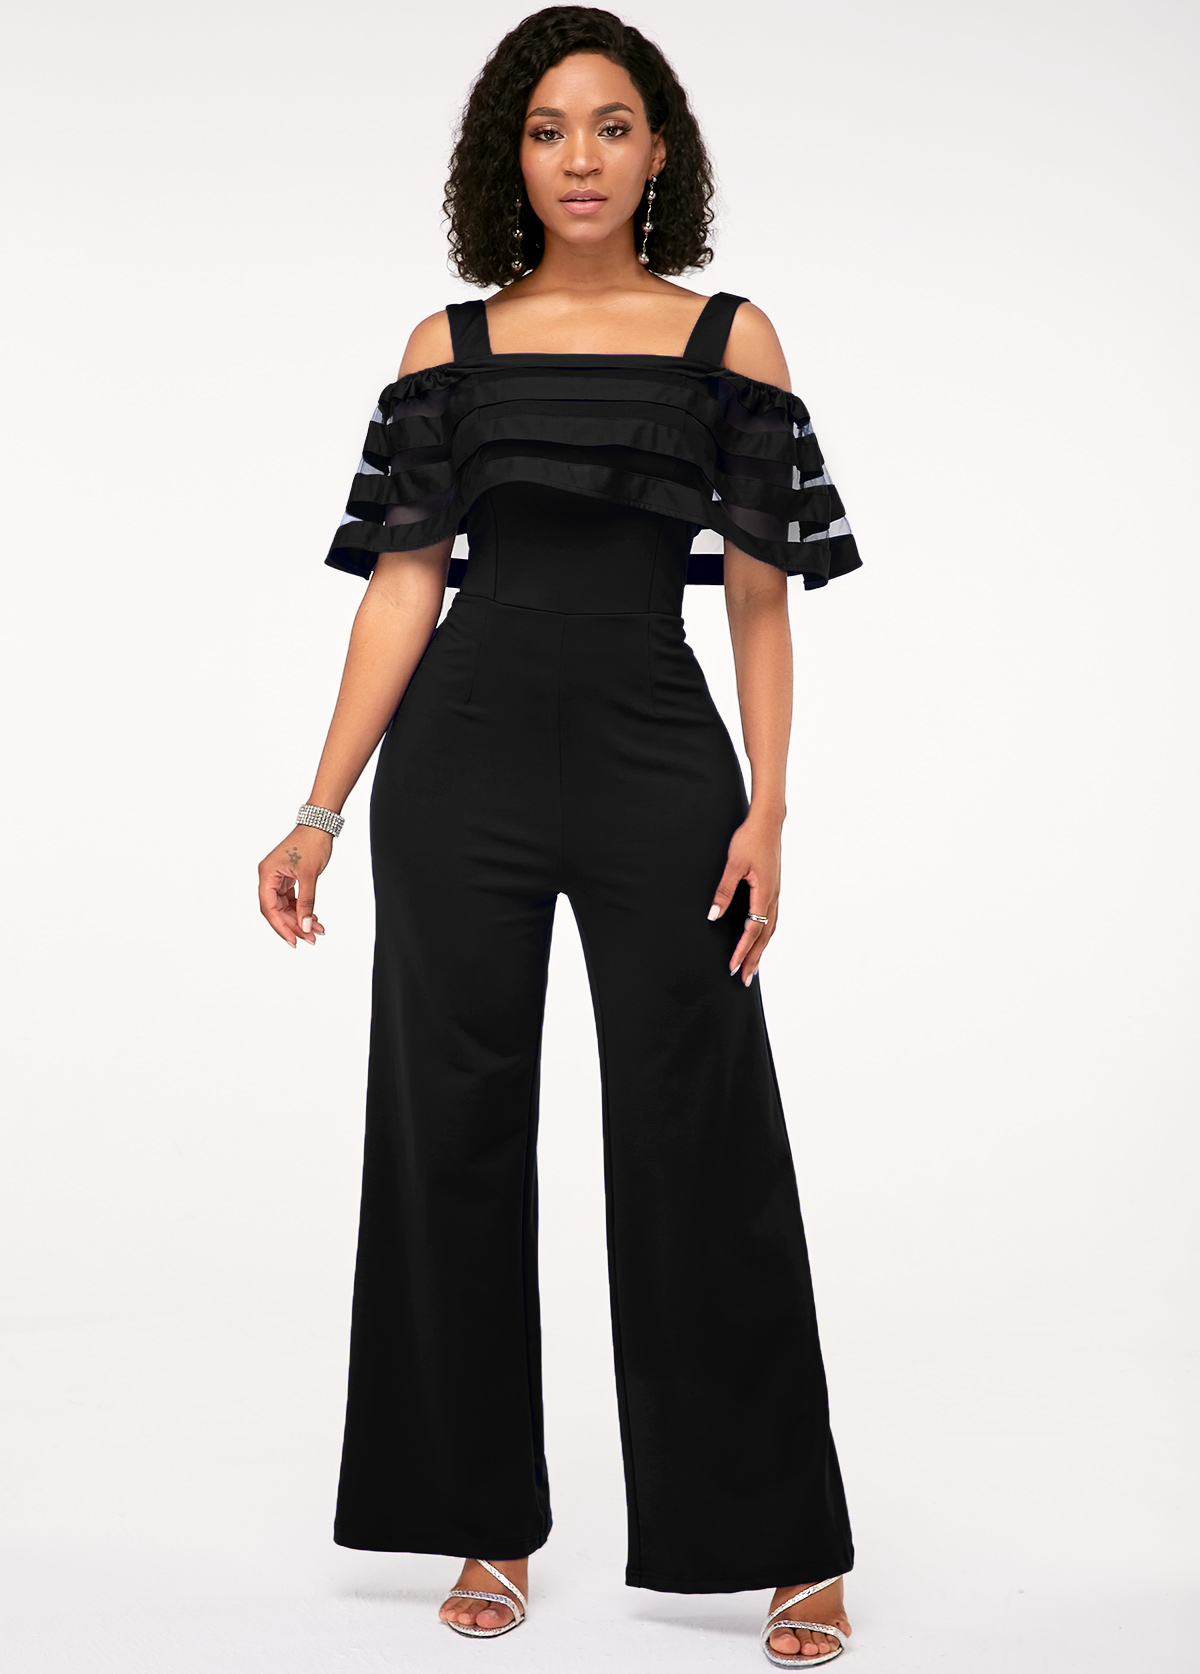 Strappy Cold Shoulder Black Ruffle Overlay Jumpsuit 